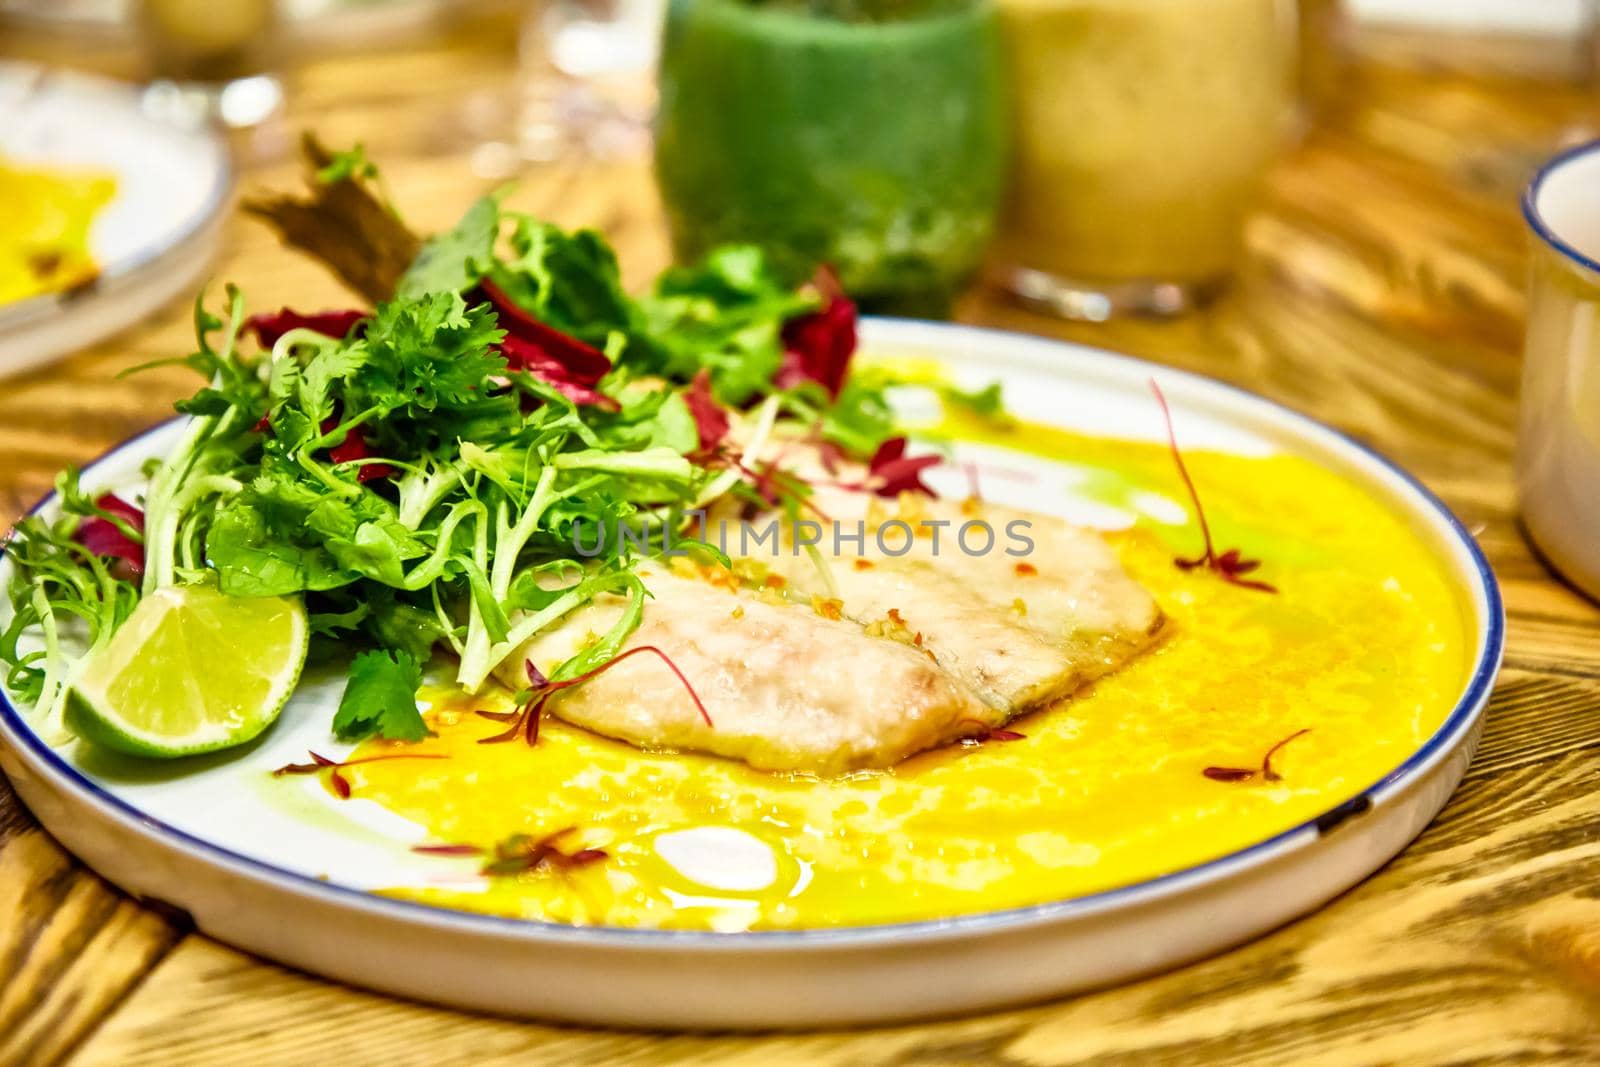 Fried fish with parsley, lettuce and sauce is on the plate